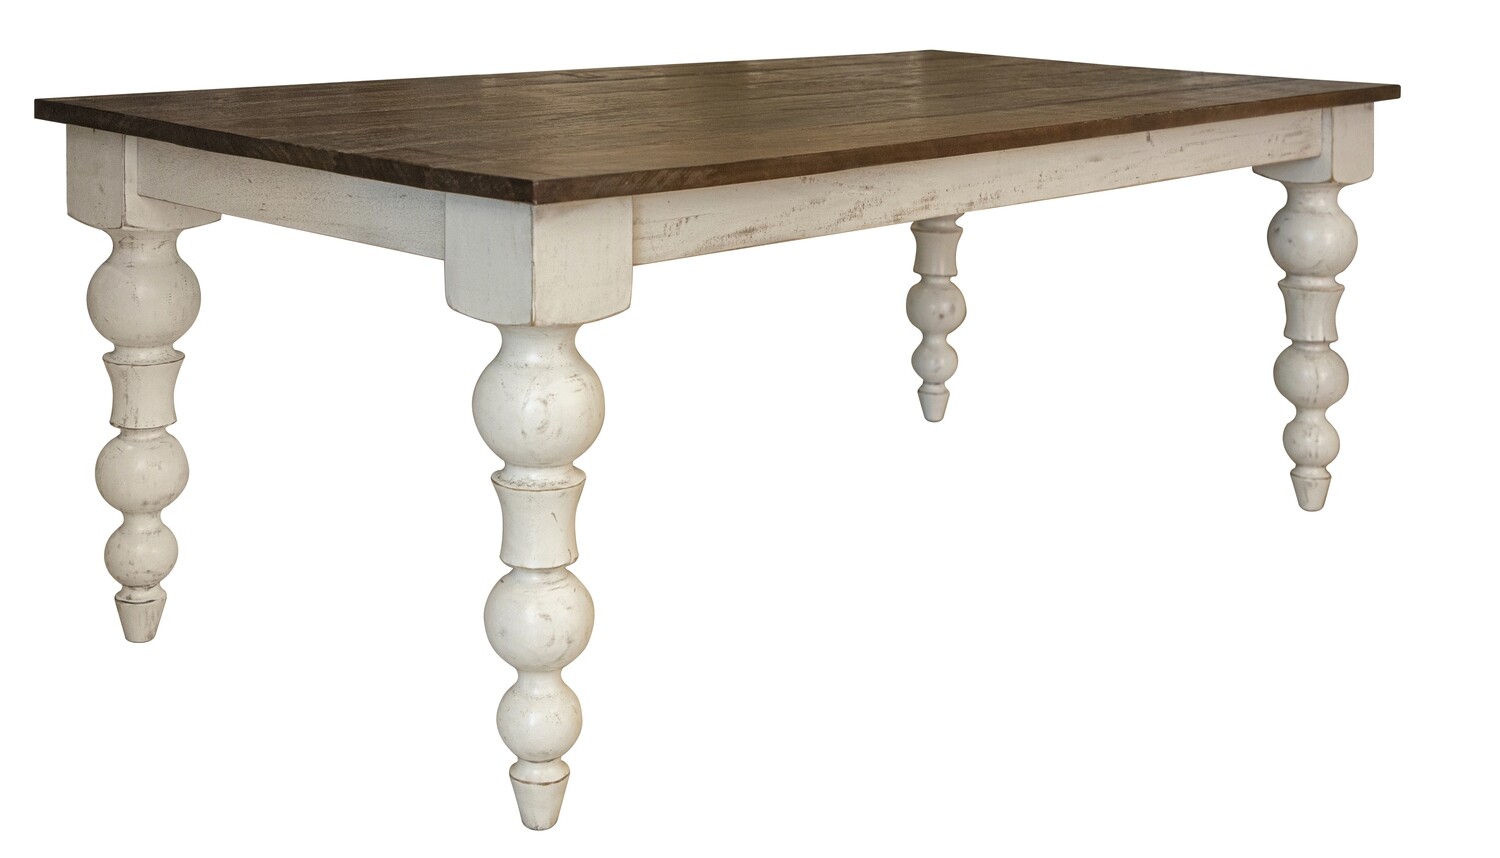 ROCK VALLEY - TABLE- 79"